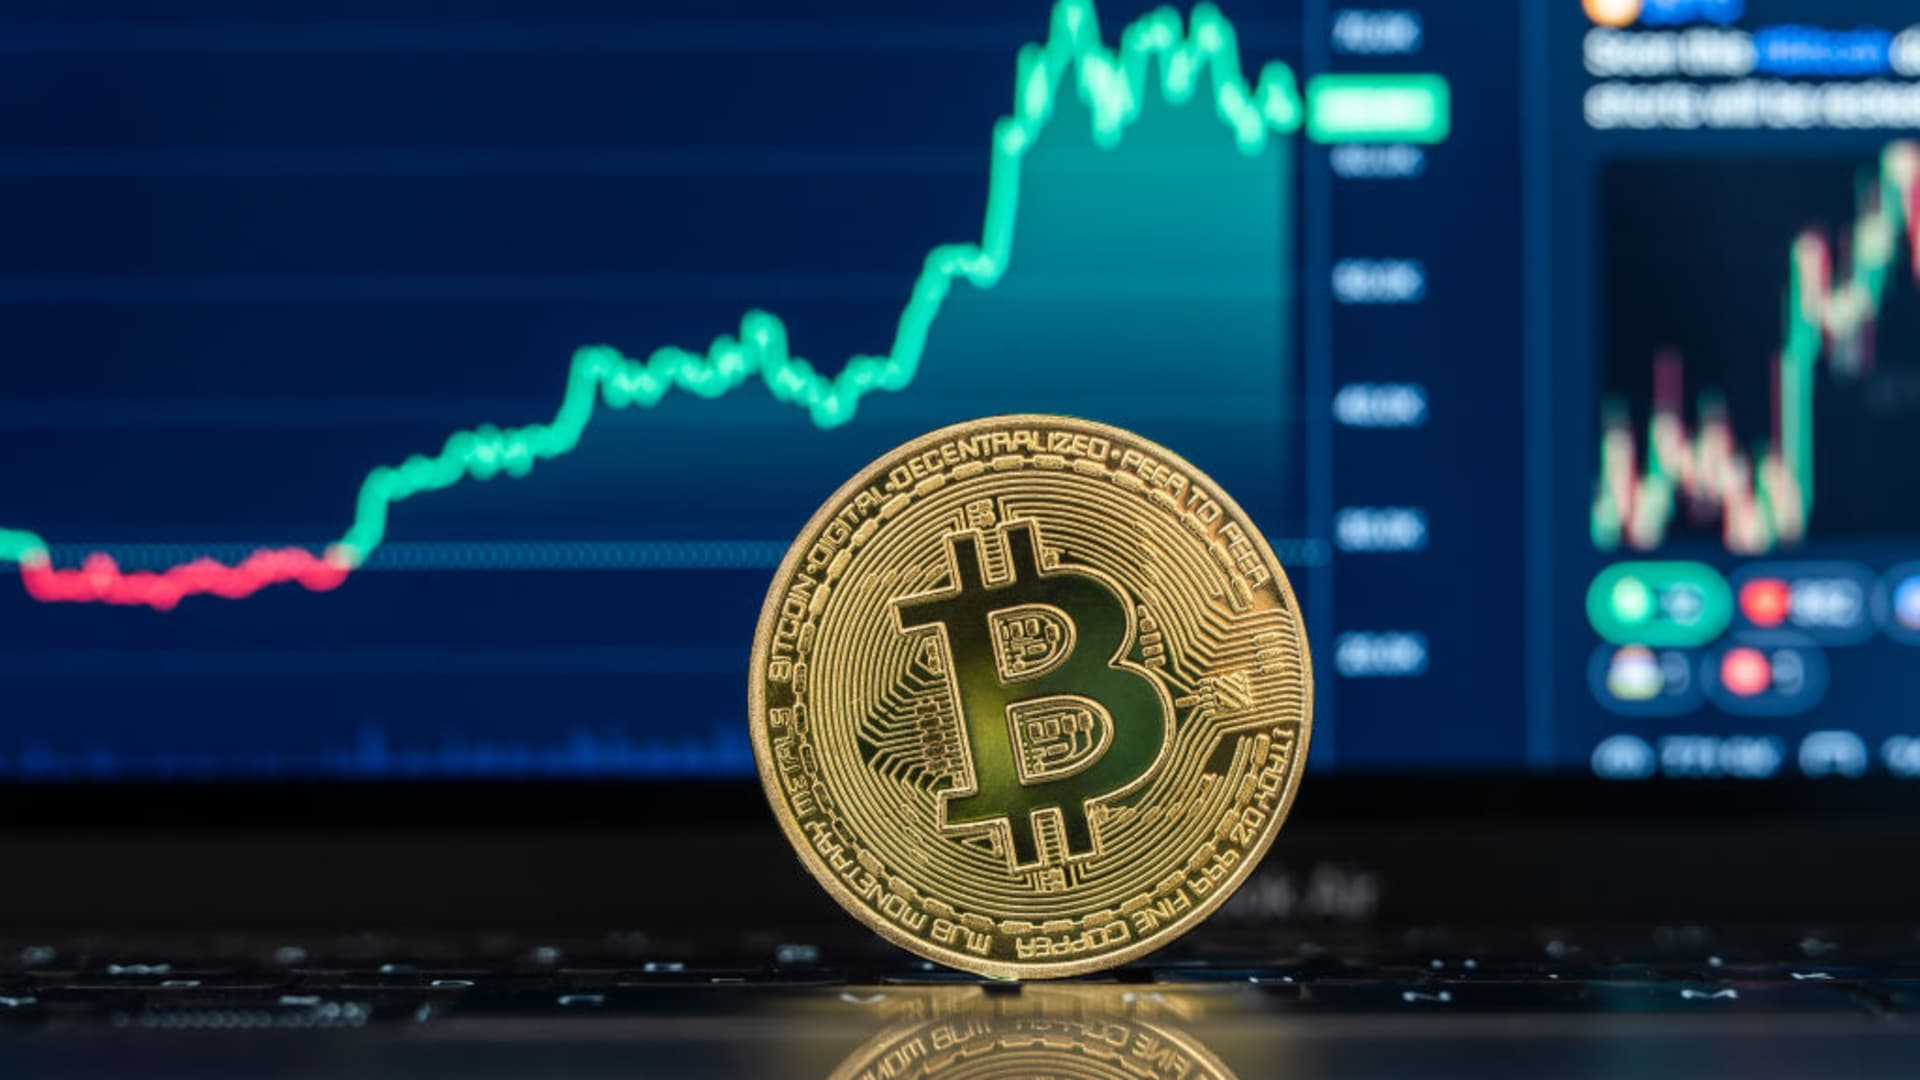 Bitcoin nosedives below ,000 to two-month low ahead of U.S. Fed decision